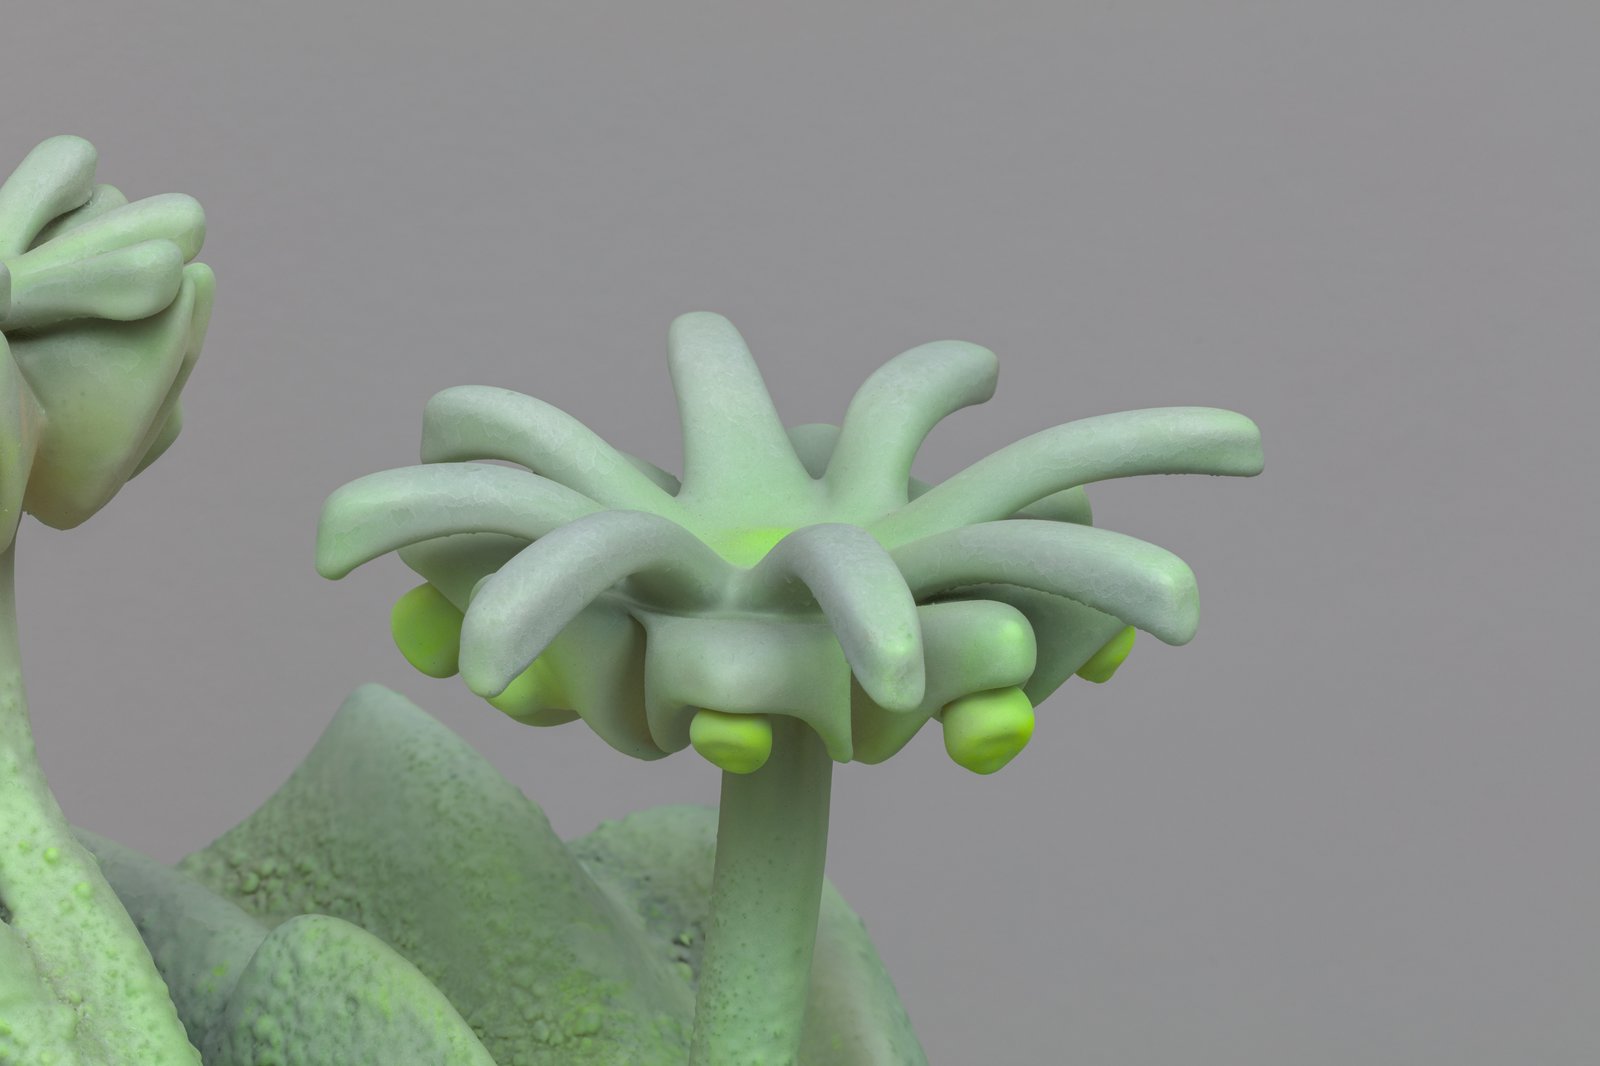 Marguerite Humeau, Marchantia, 2022, detail view.Wax, sugars, mineral dust, glass, natural extracts, pigments, thermochromic pigments, plant-based and synthetic resin, nylon, bronze, work: 56 x 86.5 x 48.5 cm; overall: 151 x 86.5 x 48.5 cmCourtesy of the artist and CLEARING